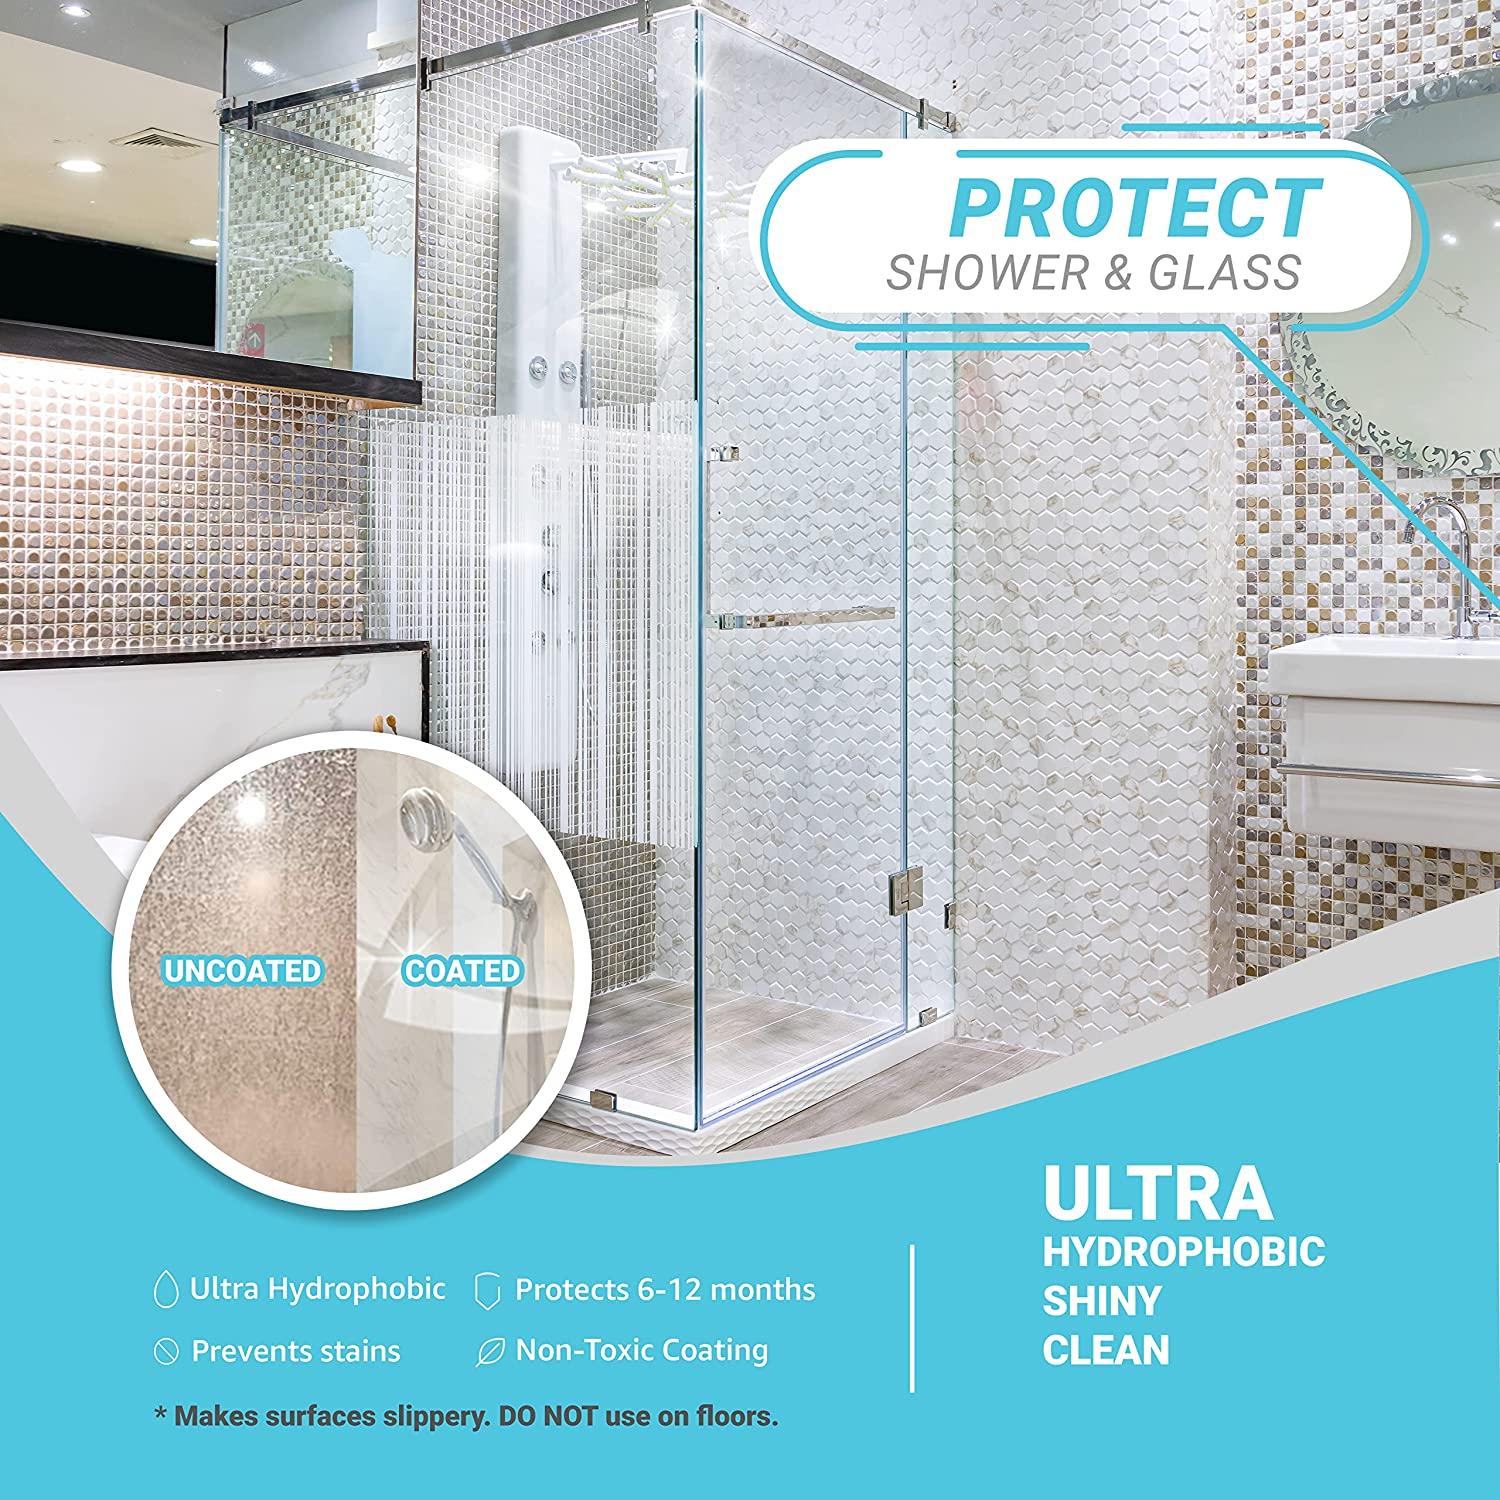 Lifeproof Home Ceramic Coating Spray Kit - Advanced Ceramic Technology for  Home Kitchen & Bath Surfaces - Prevents Stains - Keeps Surfaces Cleaner For  Longer - Super-slick Anti-stick Properties - Ultra Hydrophobic - Great